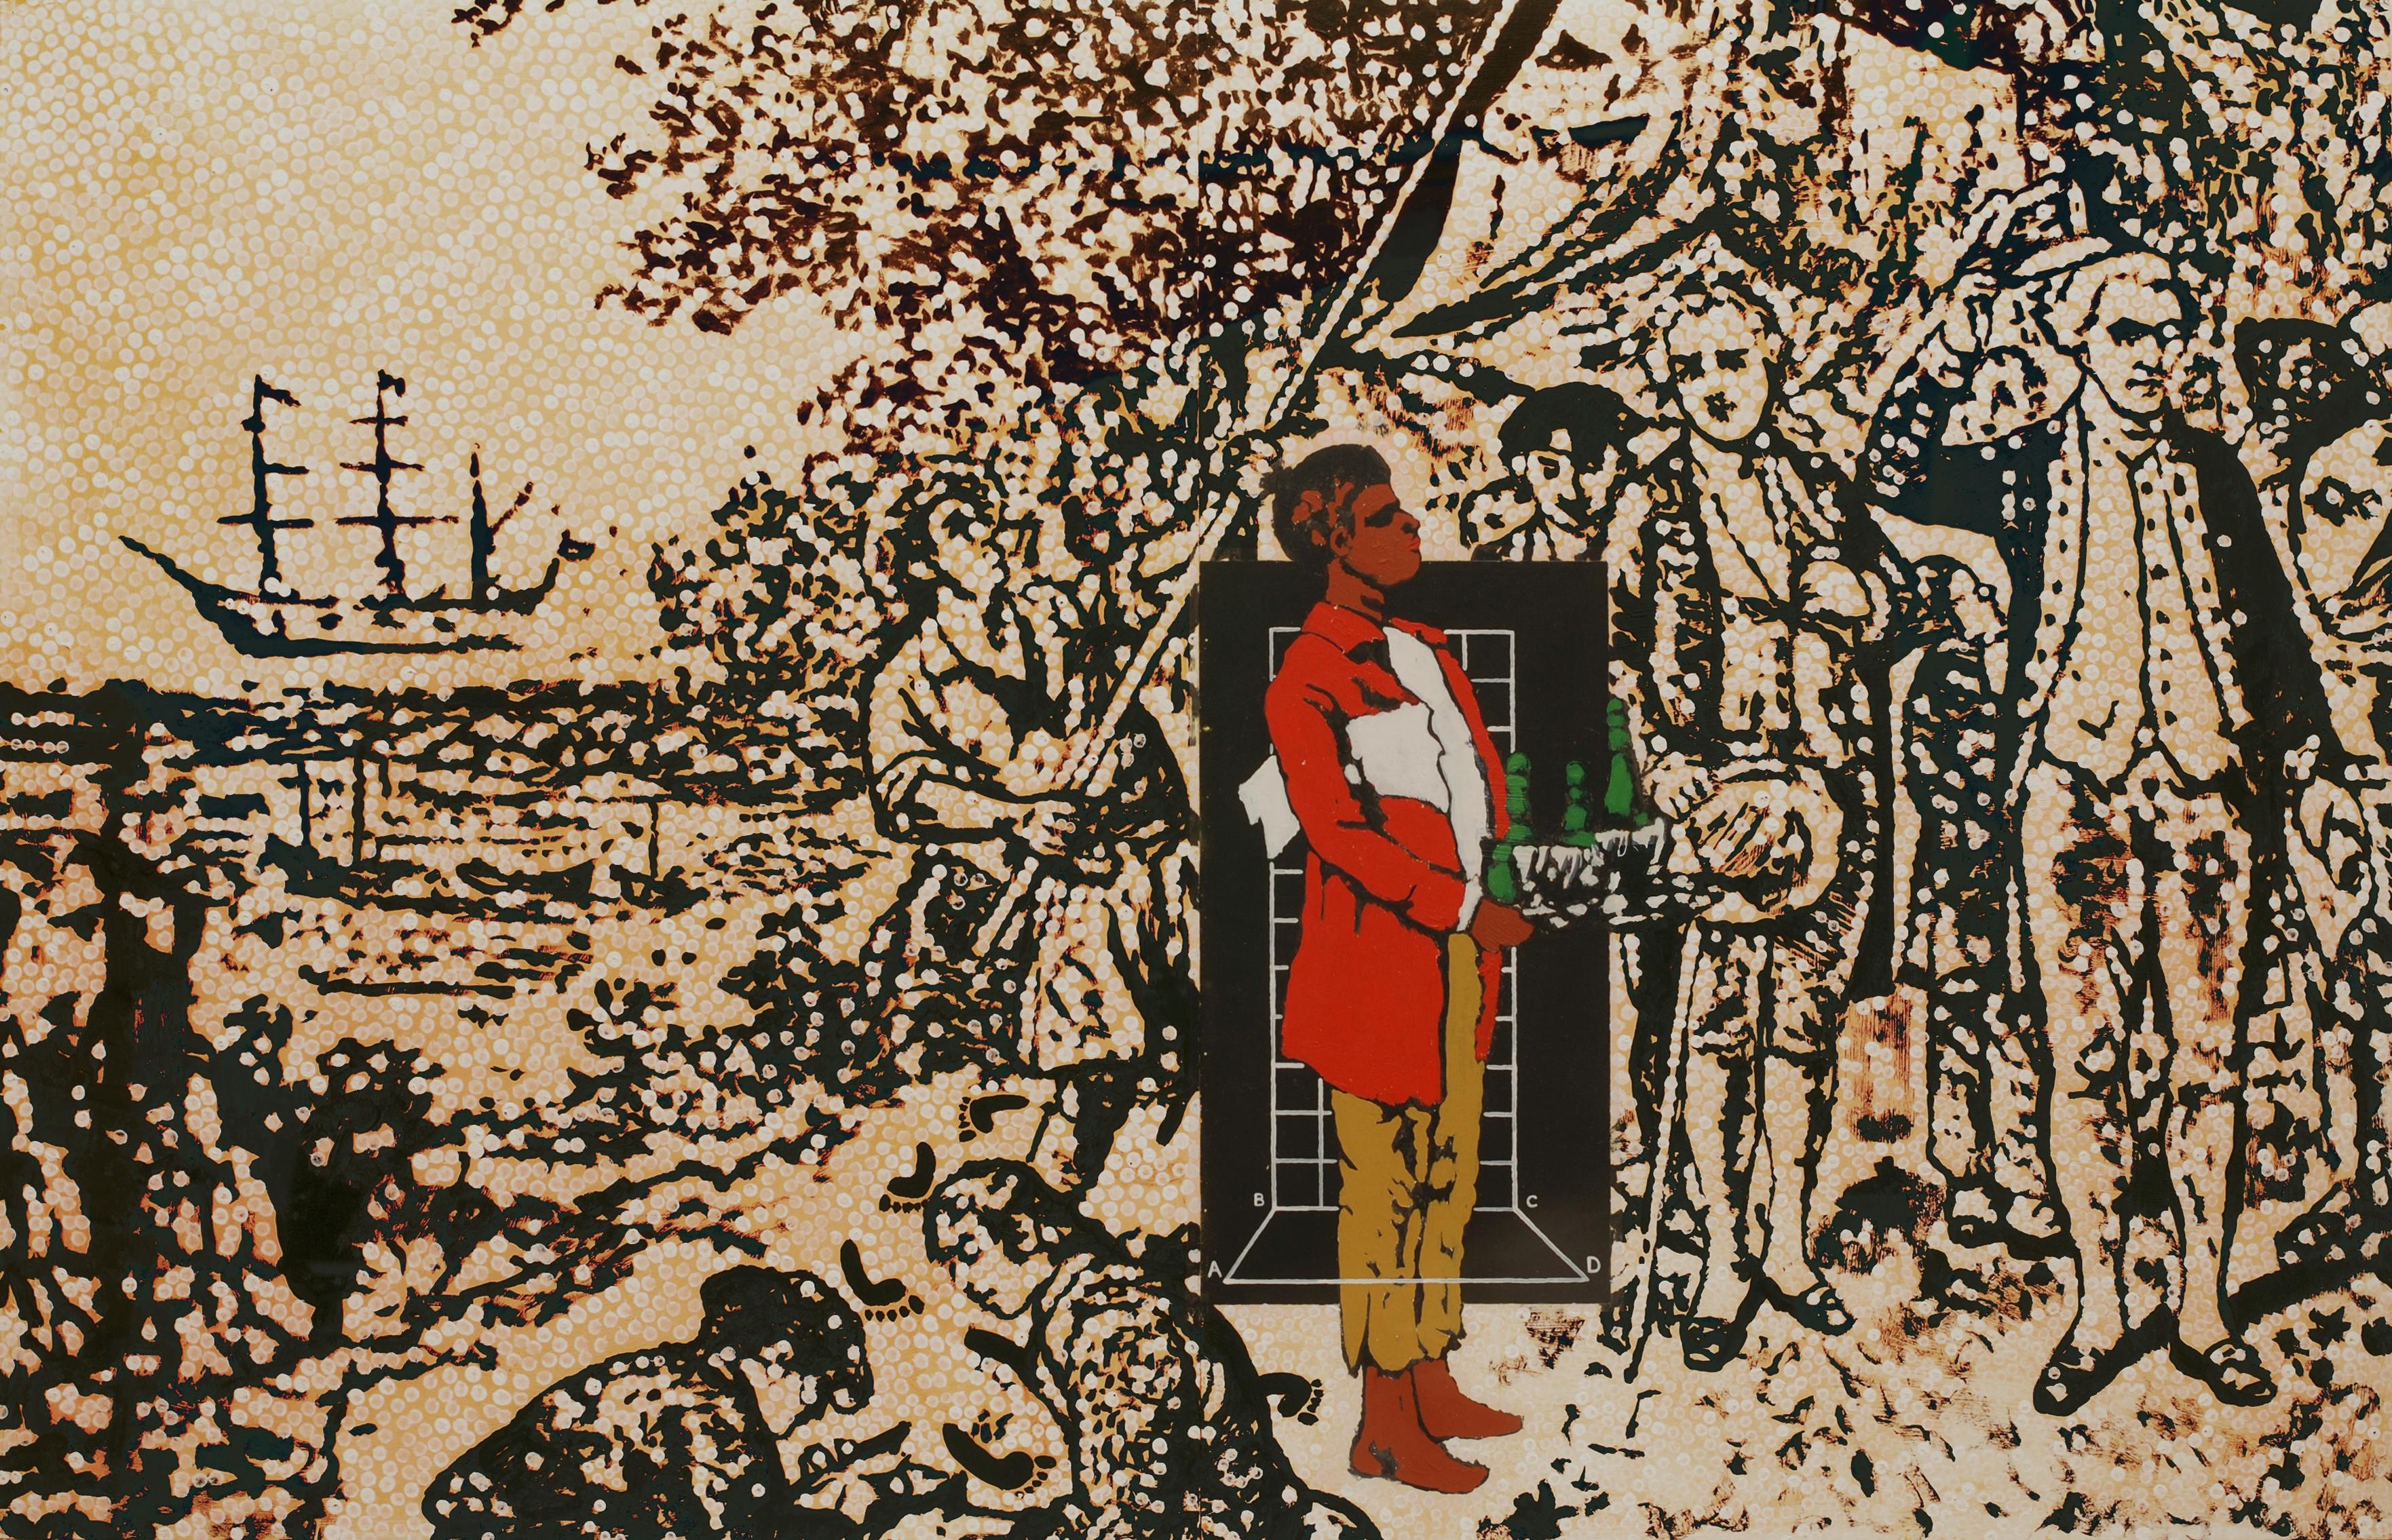 Detail image of Gordon Bennett’s work on paper. A person in a red jacket stands on a seashore, surrounded by other human figures in black and white. A ship is visible in the far left on a body of water.